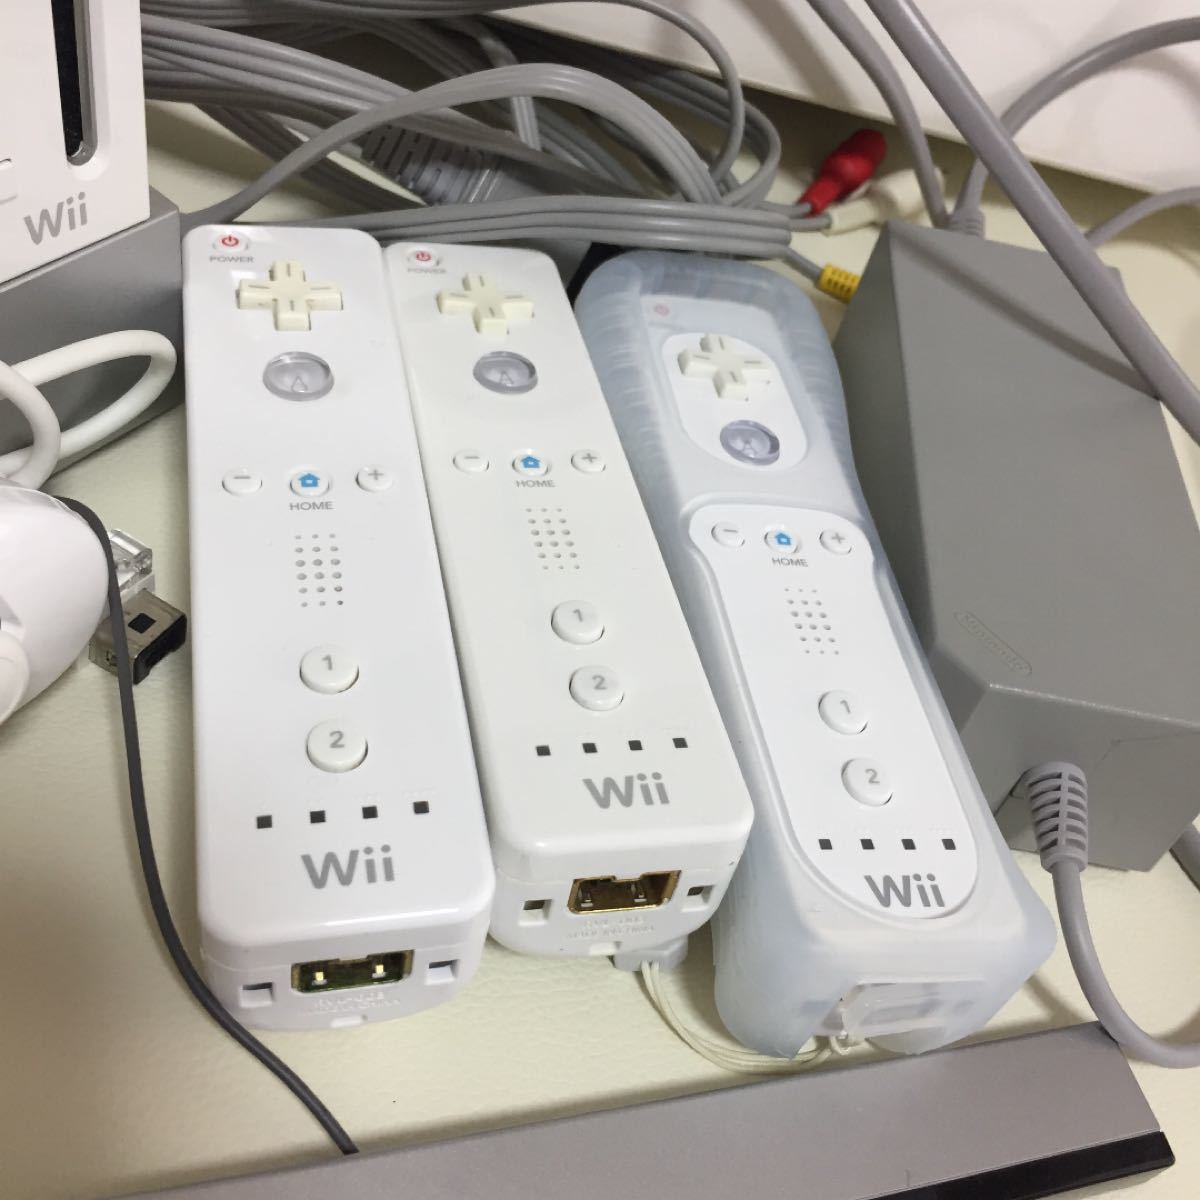 wii セット 練習ソフト&リモコン2個付き